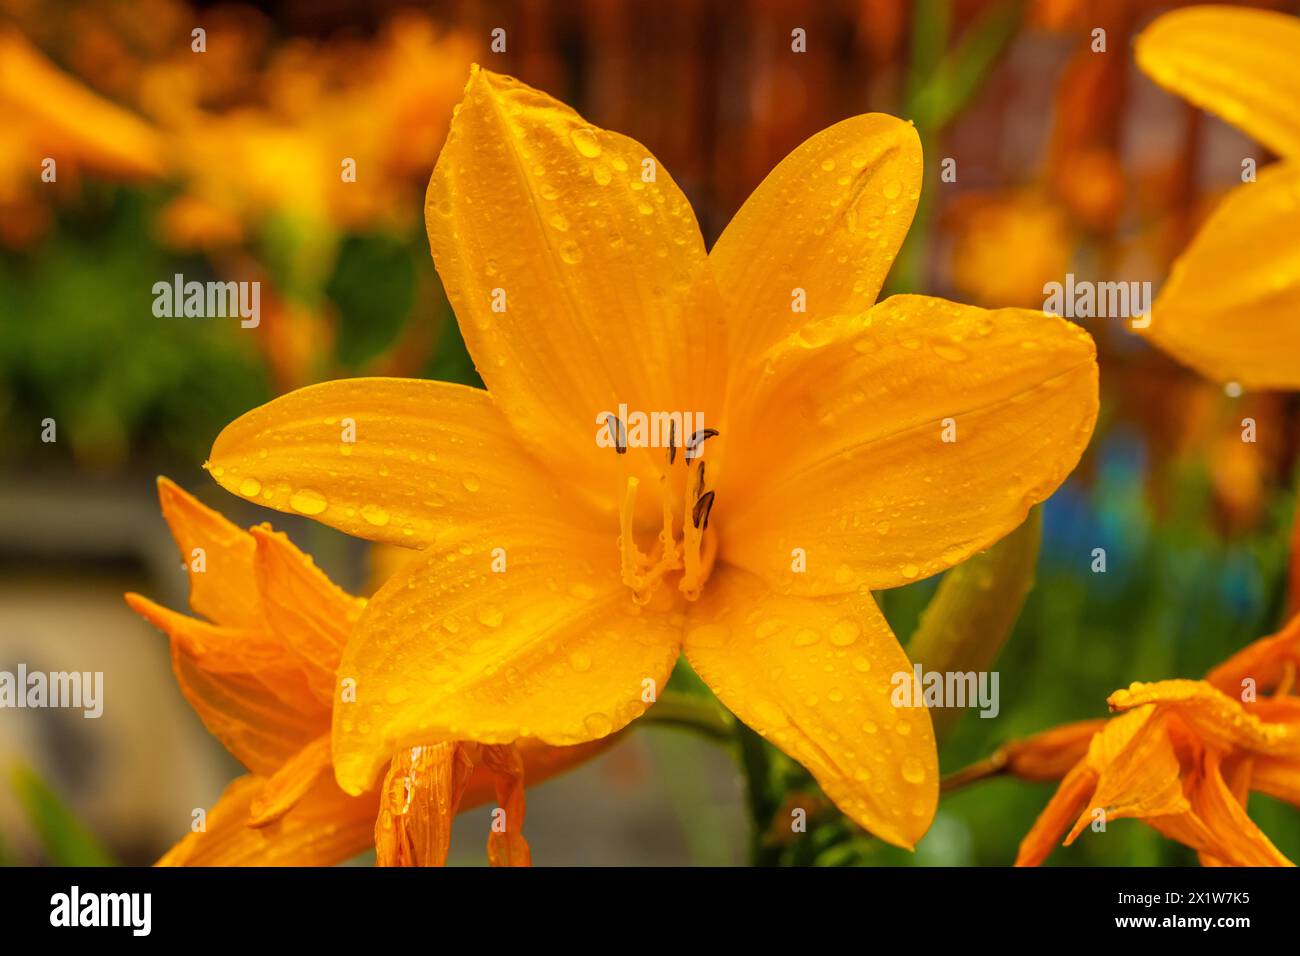 A yellow flower with dew drops on it. The flower is surrounded by other flowers Stock Photo